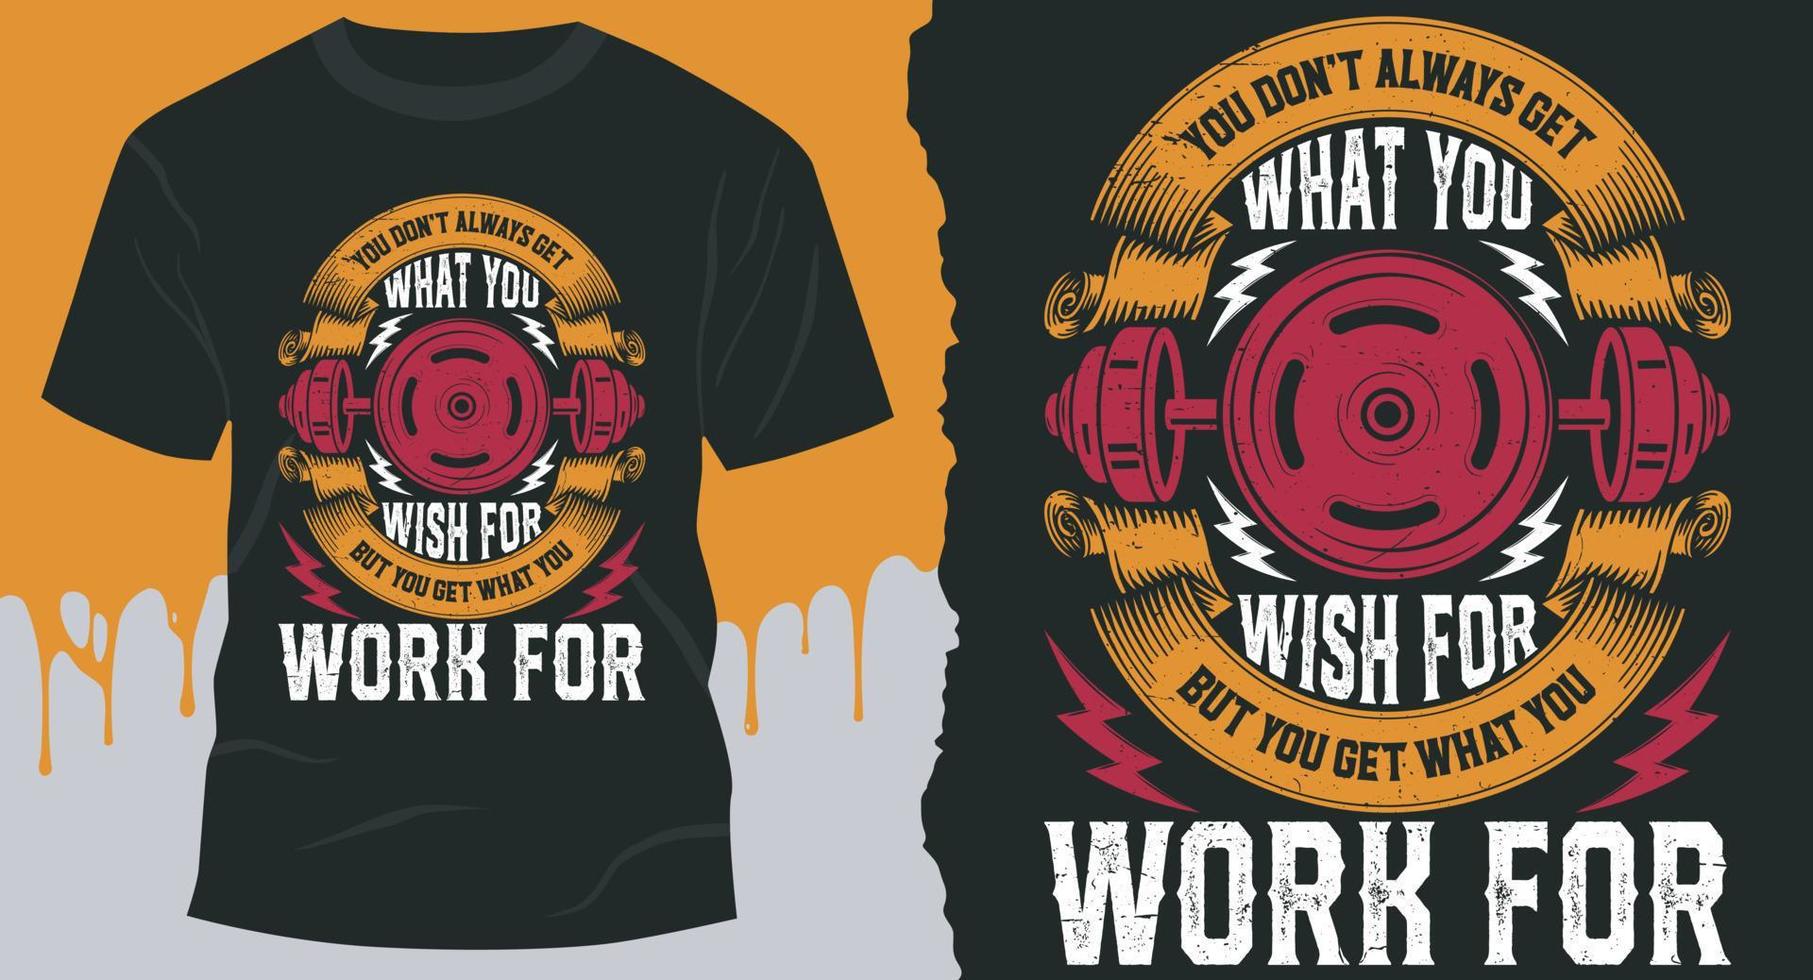 You don't always get what you wish for. But You get what you work for. Gym T-Shirt Design Vector for Bodybuilder